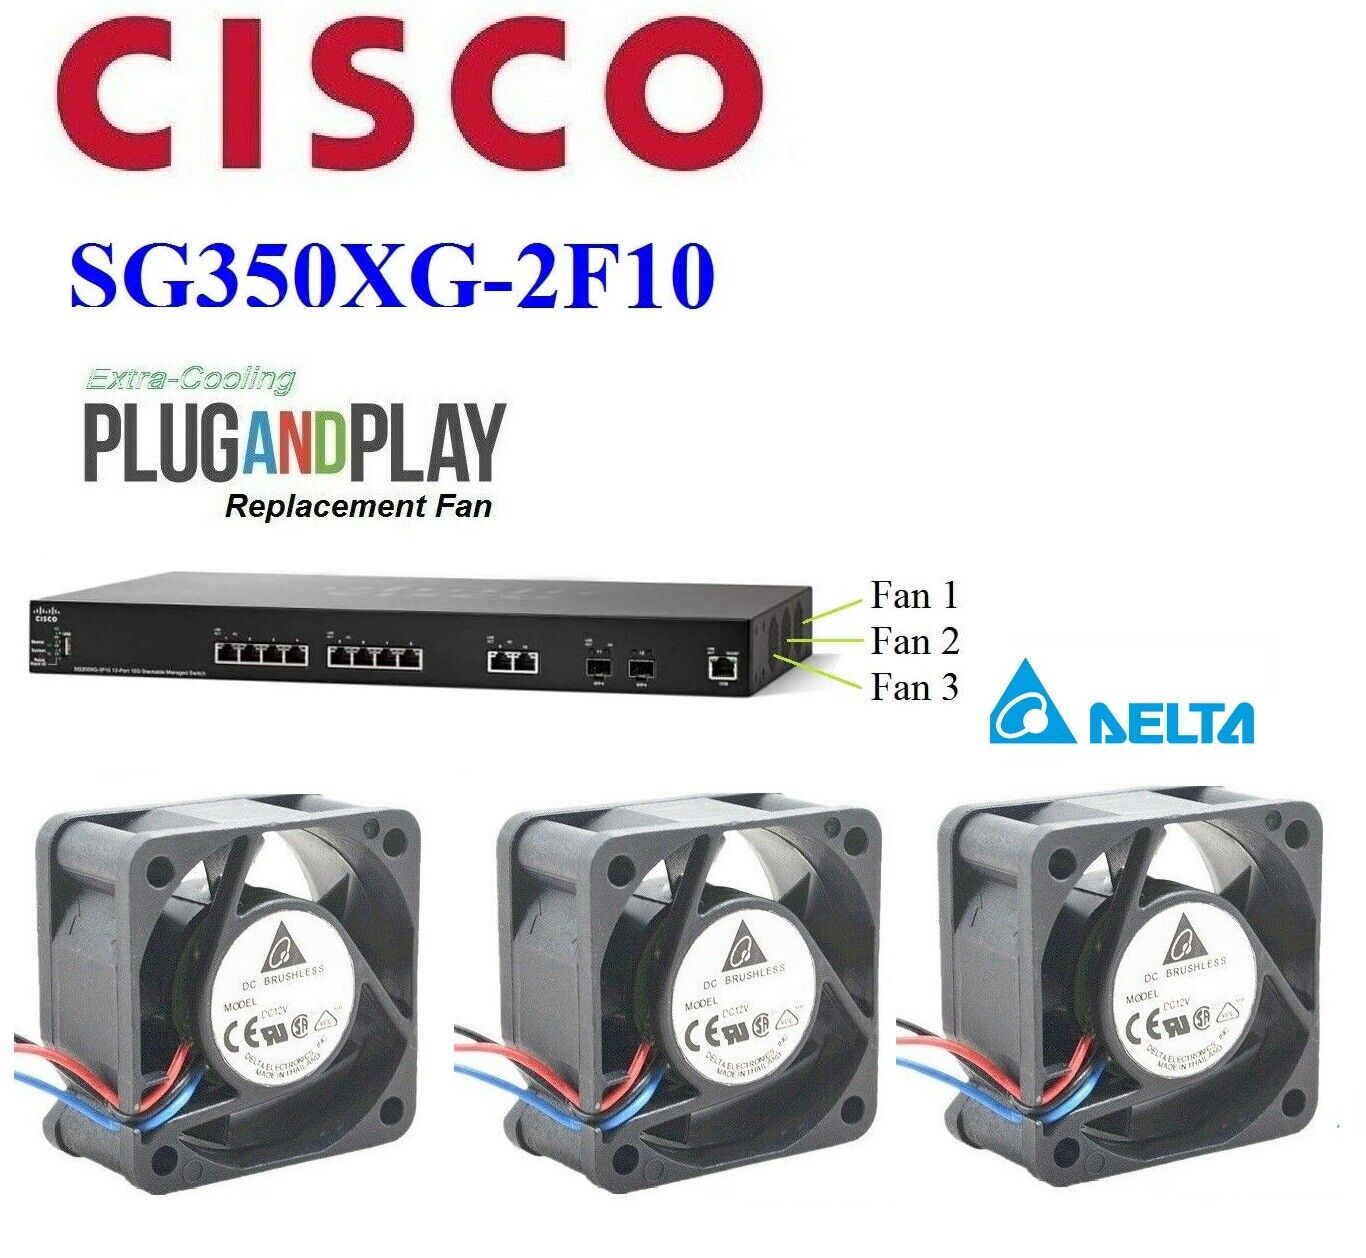 Set of 3x new Delta replacement fans for Cisco SG350XG-2F10 Cisco SG350XG-2F10